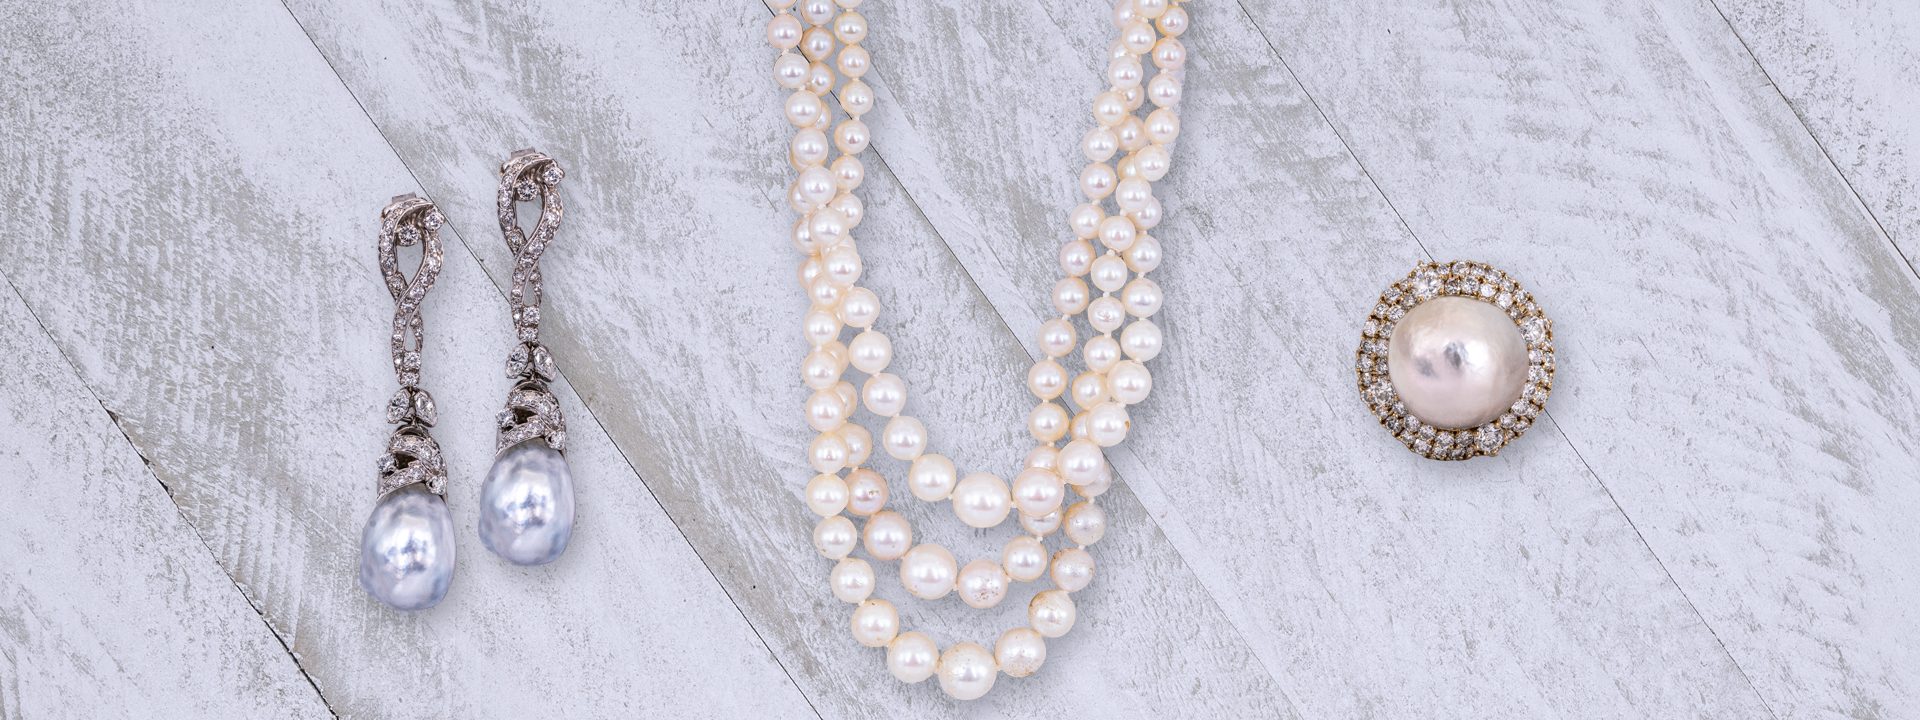 Pearl drop earrings, pearl cocktail ring, and three-strand pearl necklace on a wooden plank background.